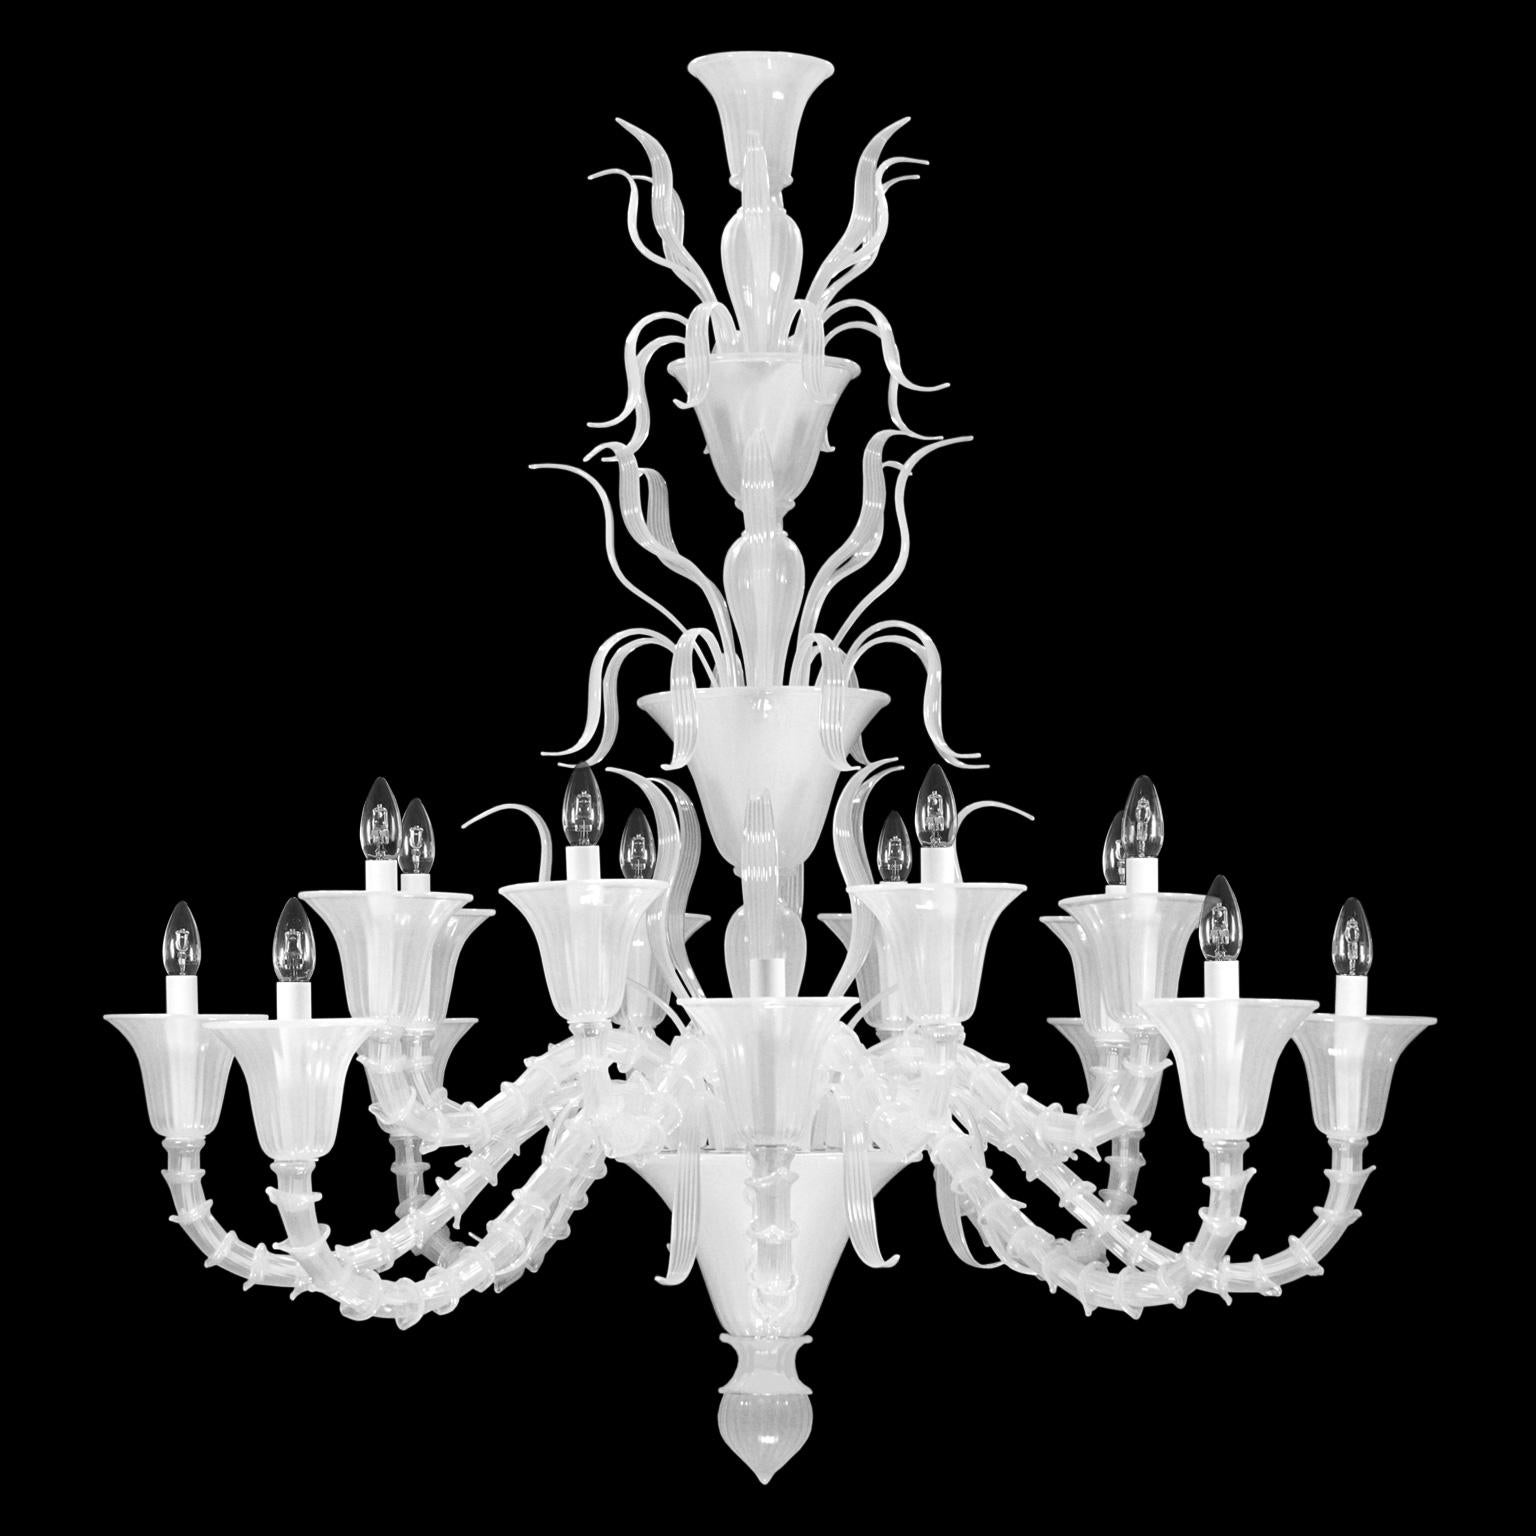 Fluage chandelier with 8+8 lights in silk Murano glass with rings by Multiforme

The blown glass chandelier Fluage is the perfect combination between the Venetian tradition and the most refined design. To manufacture the blown glass chandelier